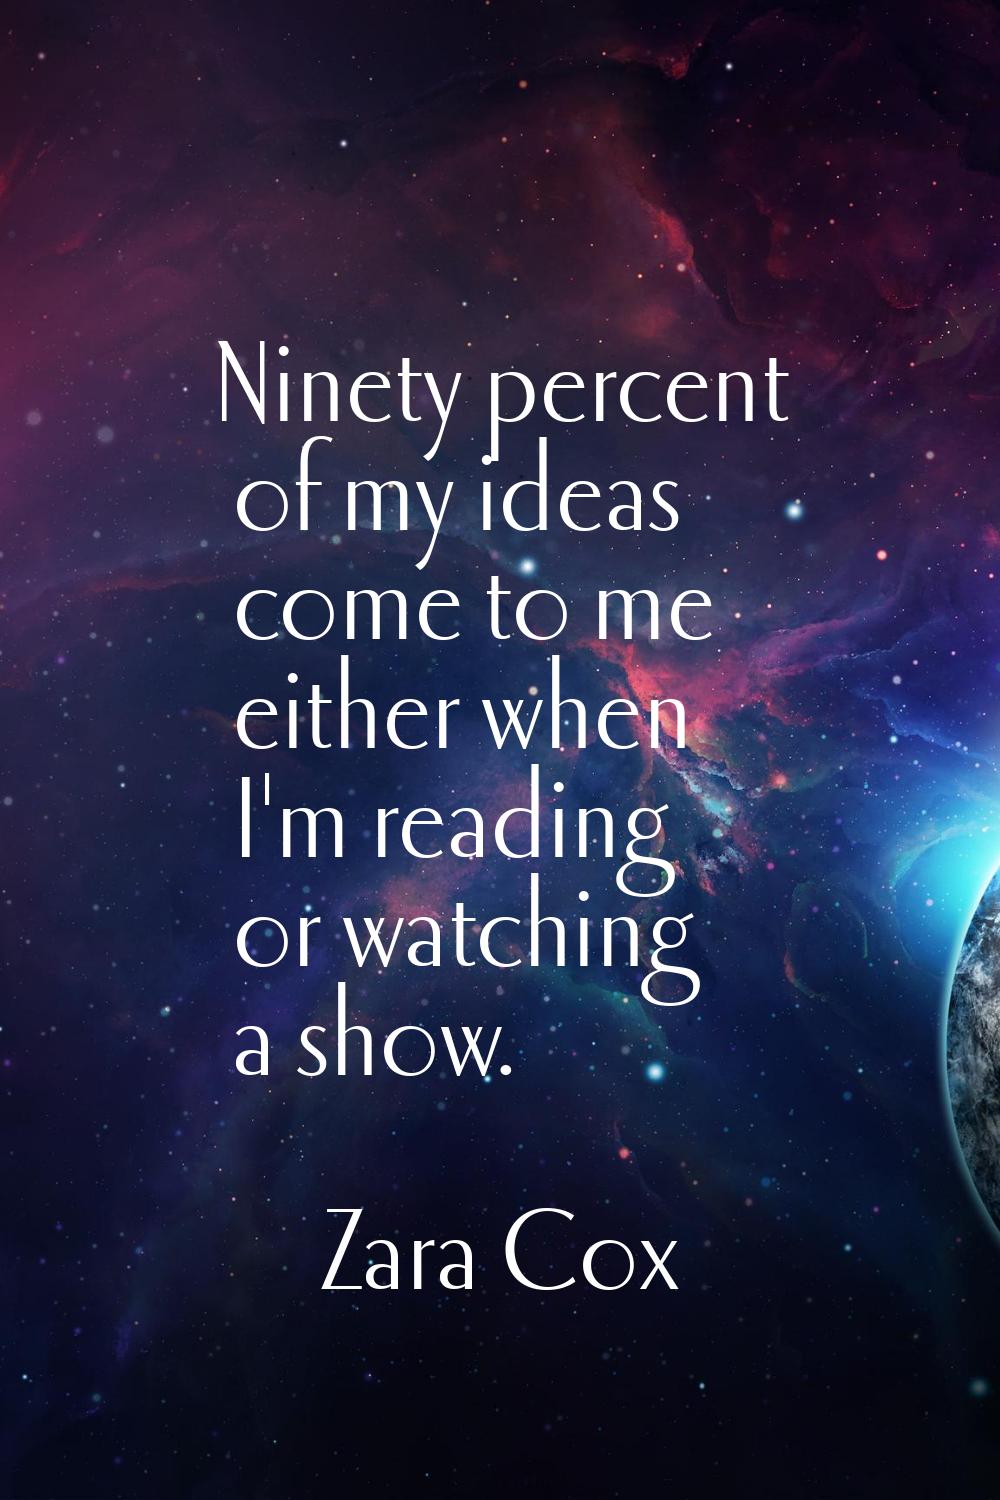 Ninety percent of my ideas come to me either when I'm reading or watching a show.